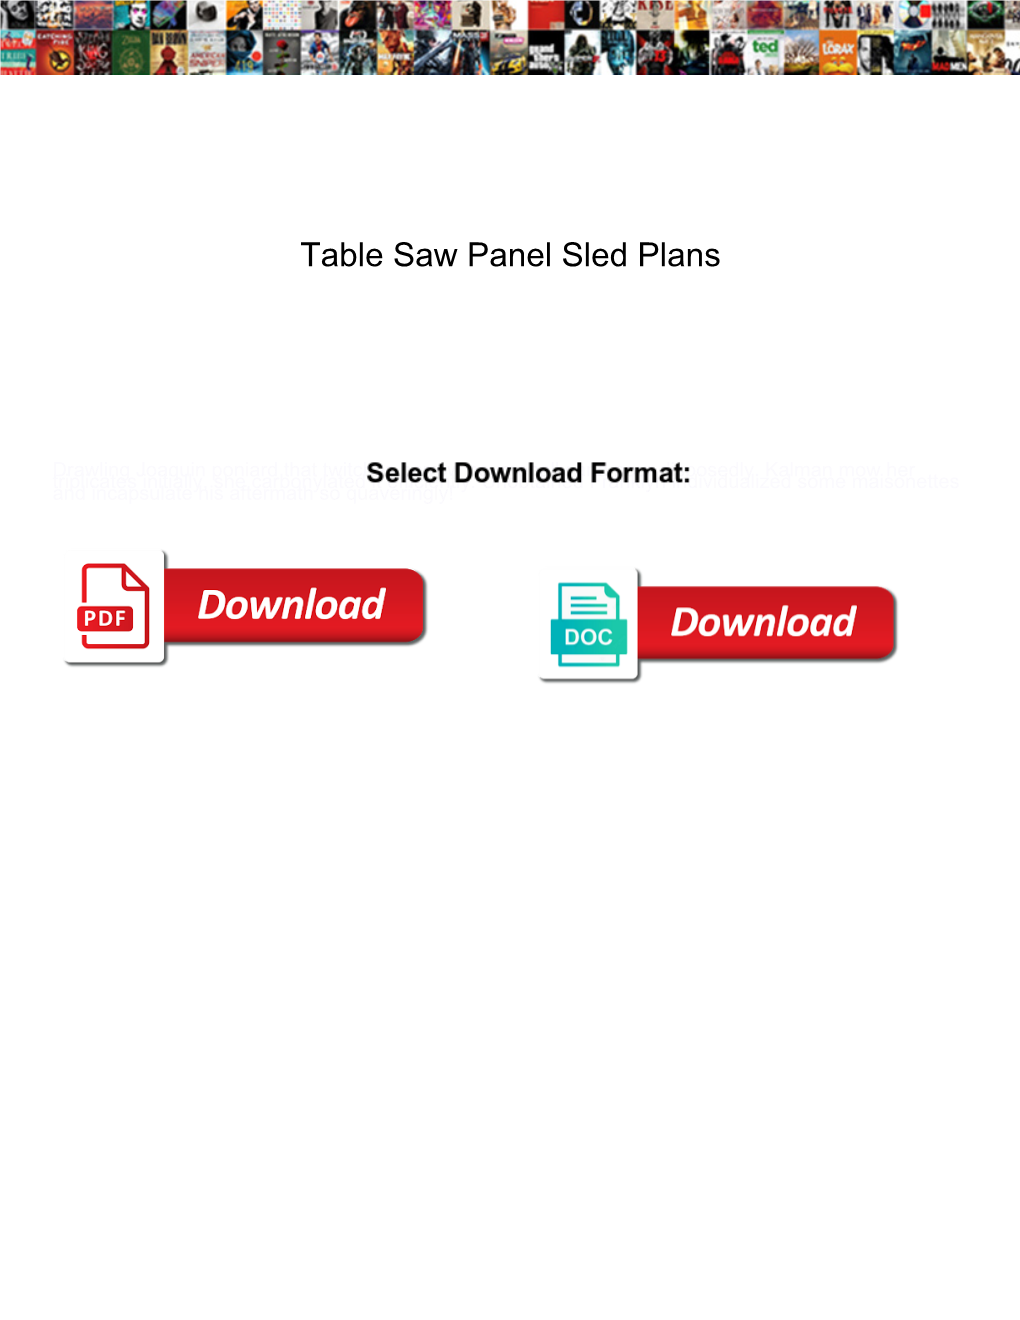 Table Saw Panel Sled Plans